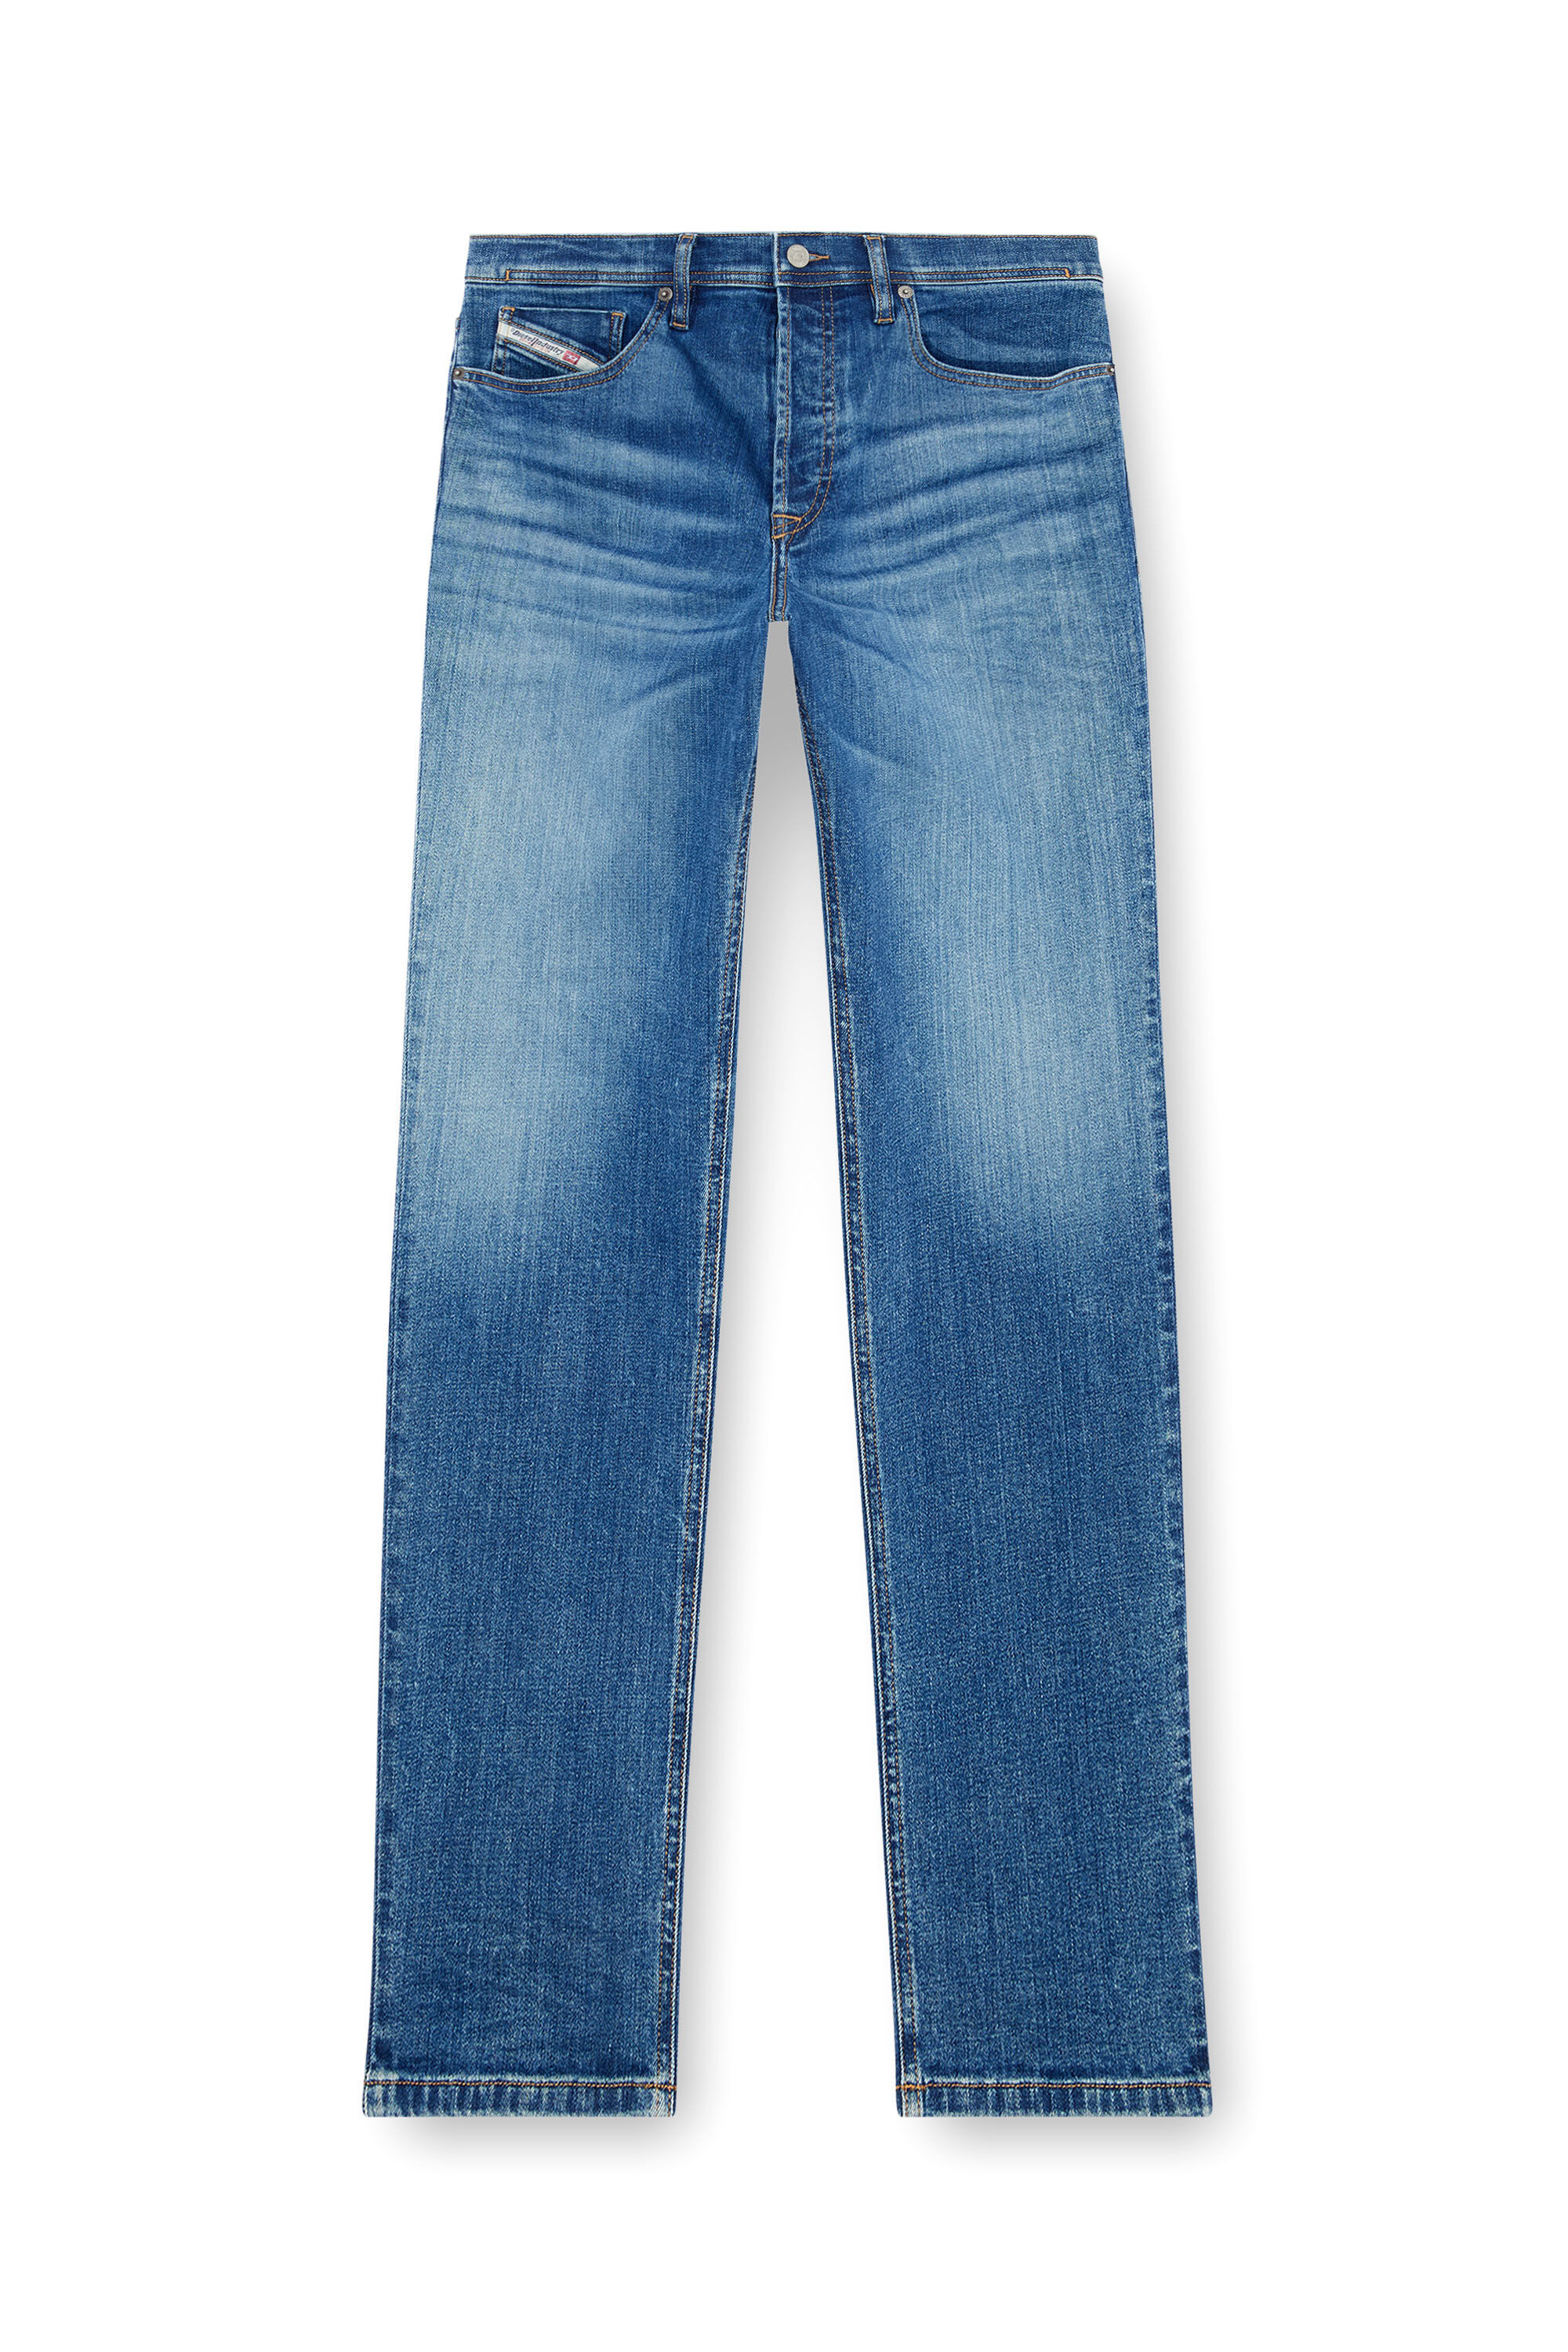 Diesel - Tapered Jeans 2023 D-Finitive 0GRDP, Hombre Tapered Jeans - 2023 D-Finitive in Azul marino - Image 2